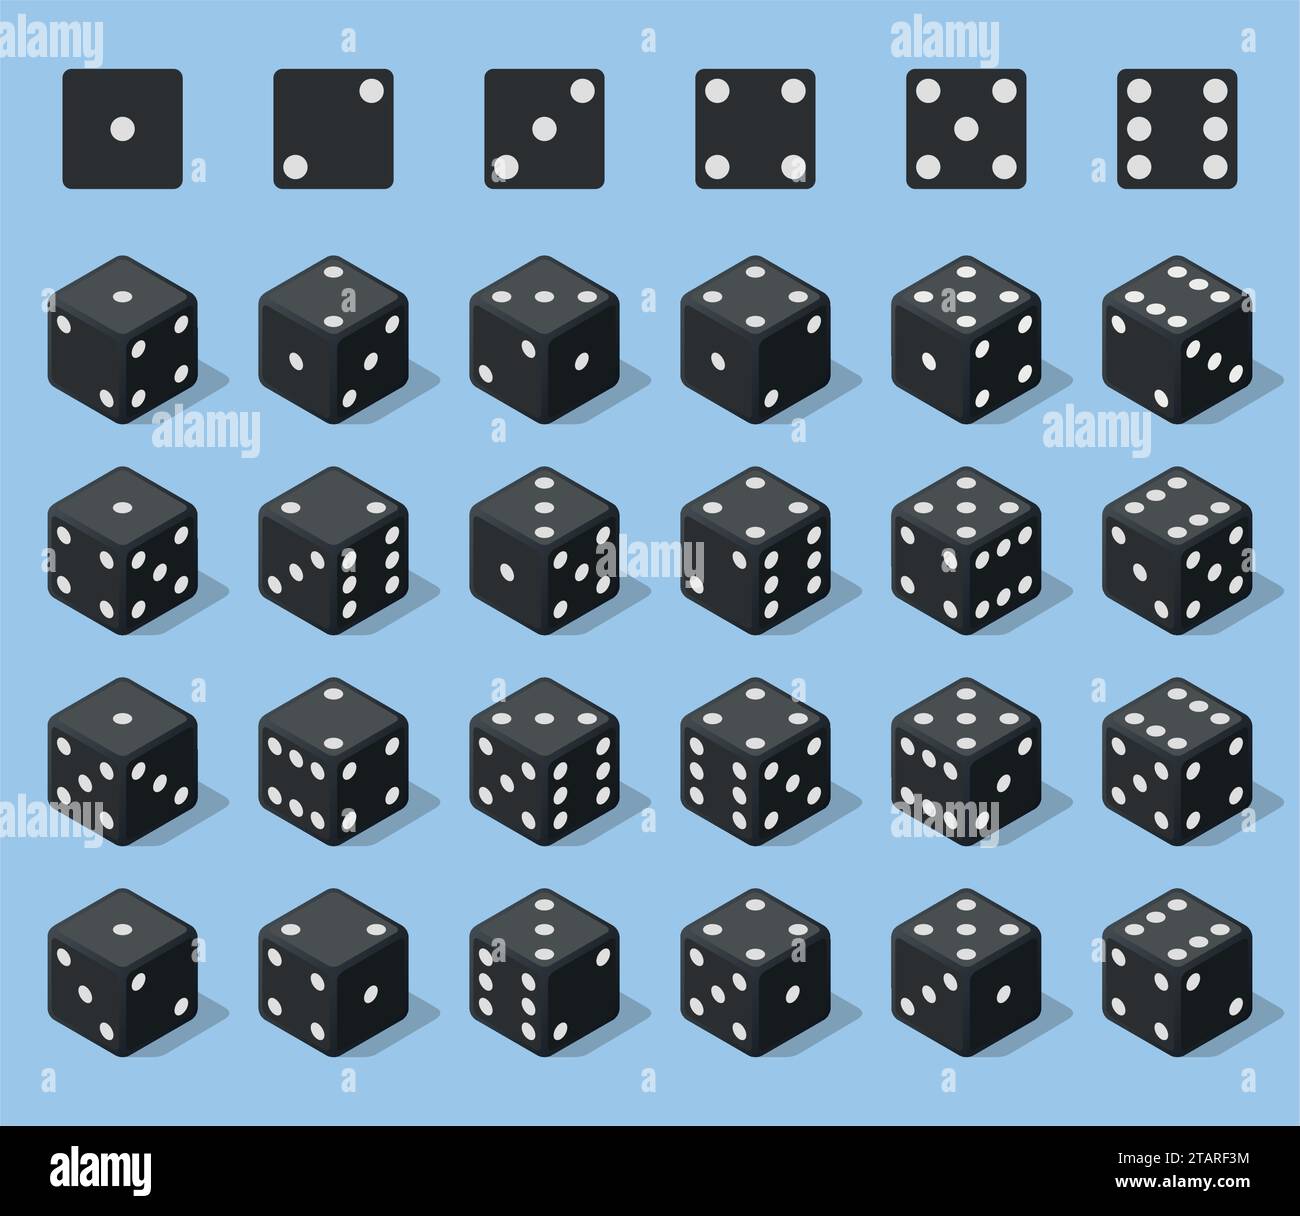 Set 24 authentic icons of dice in all possible turns. Twenty four variants loss dice. Black game cubes isolated on blue background. Board games dice Stock Vector